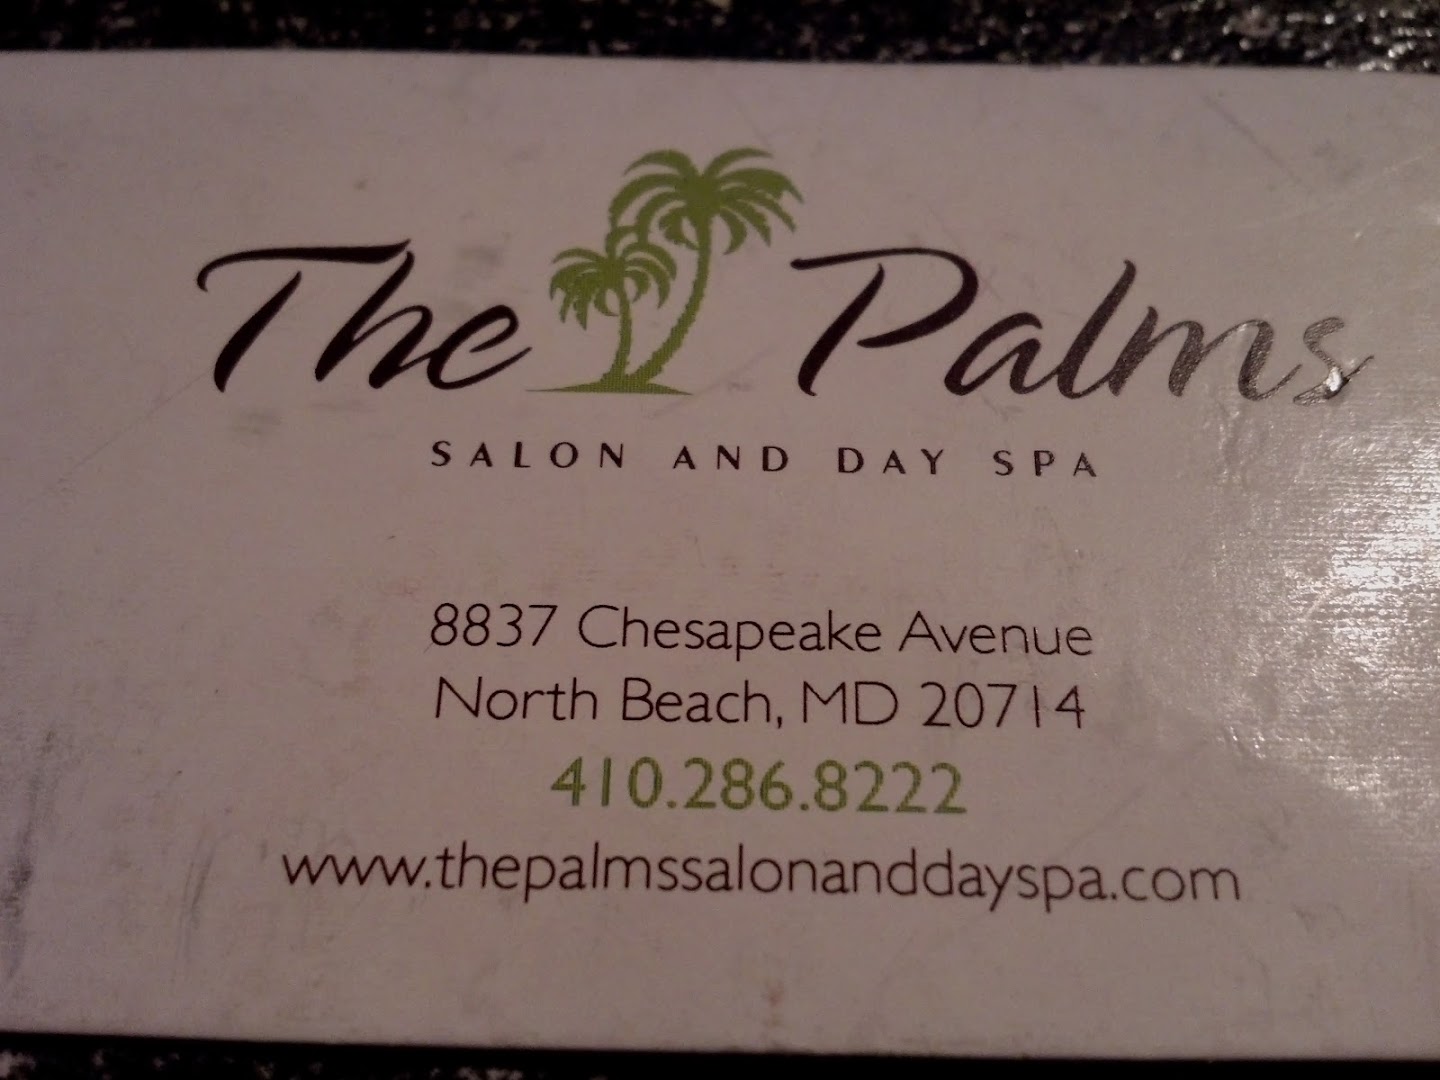 The Palms Salon and Day Spa